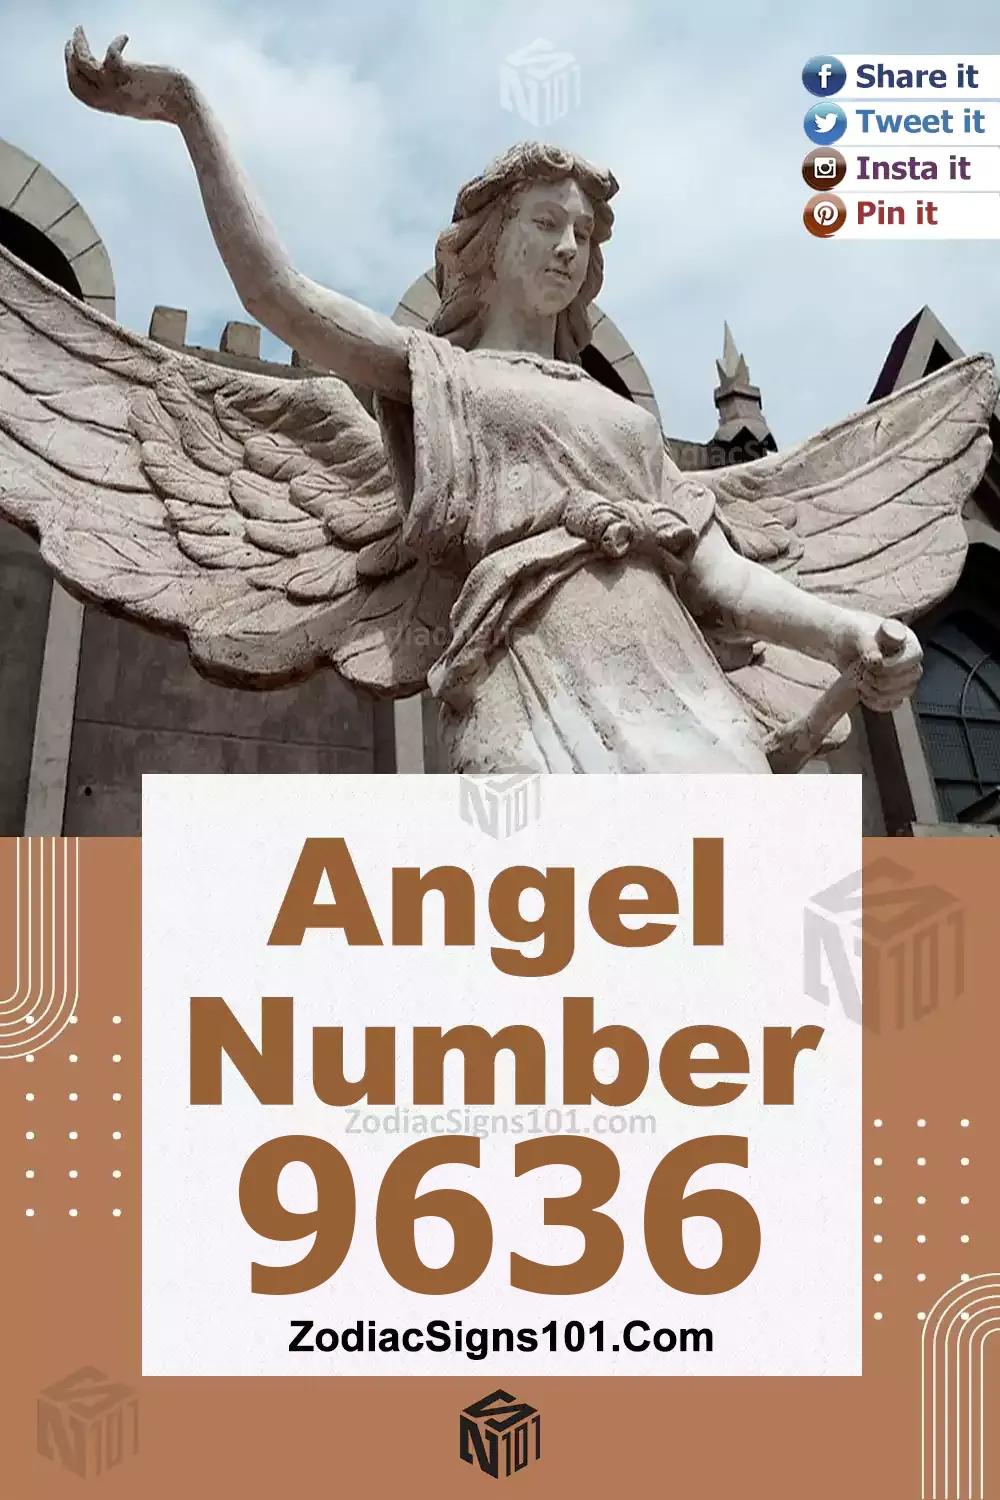 9636 Angel Number Meaning